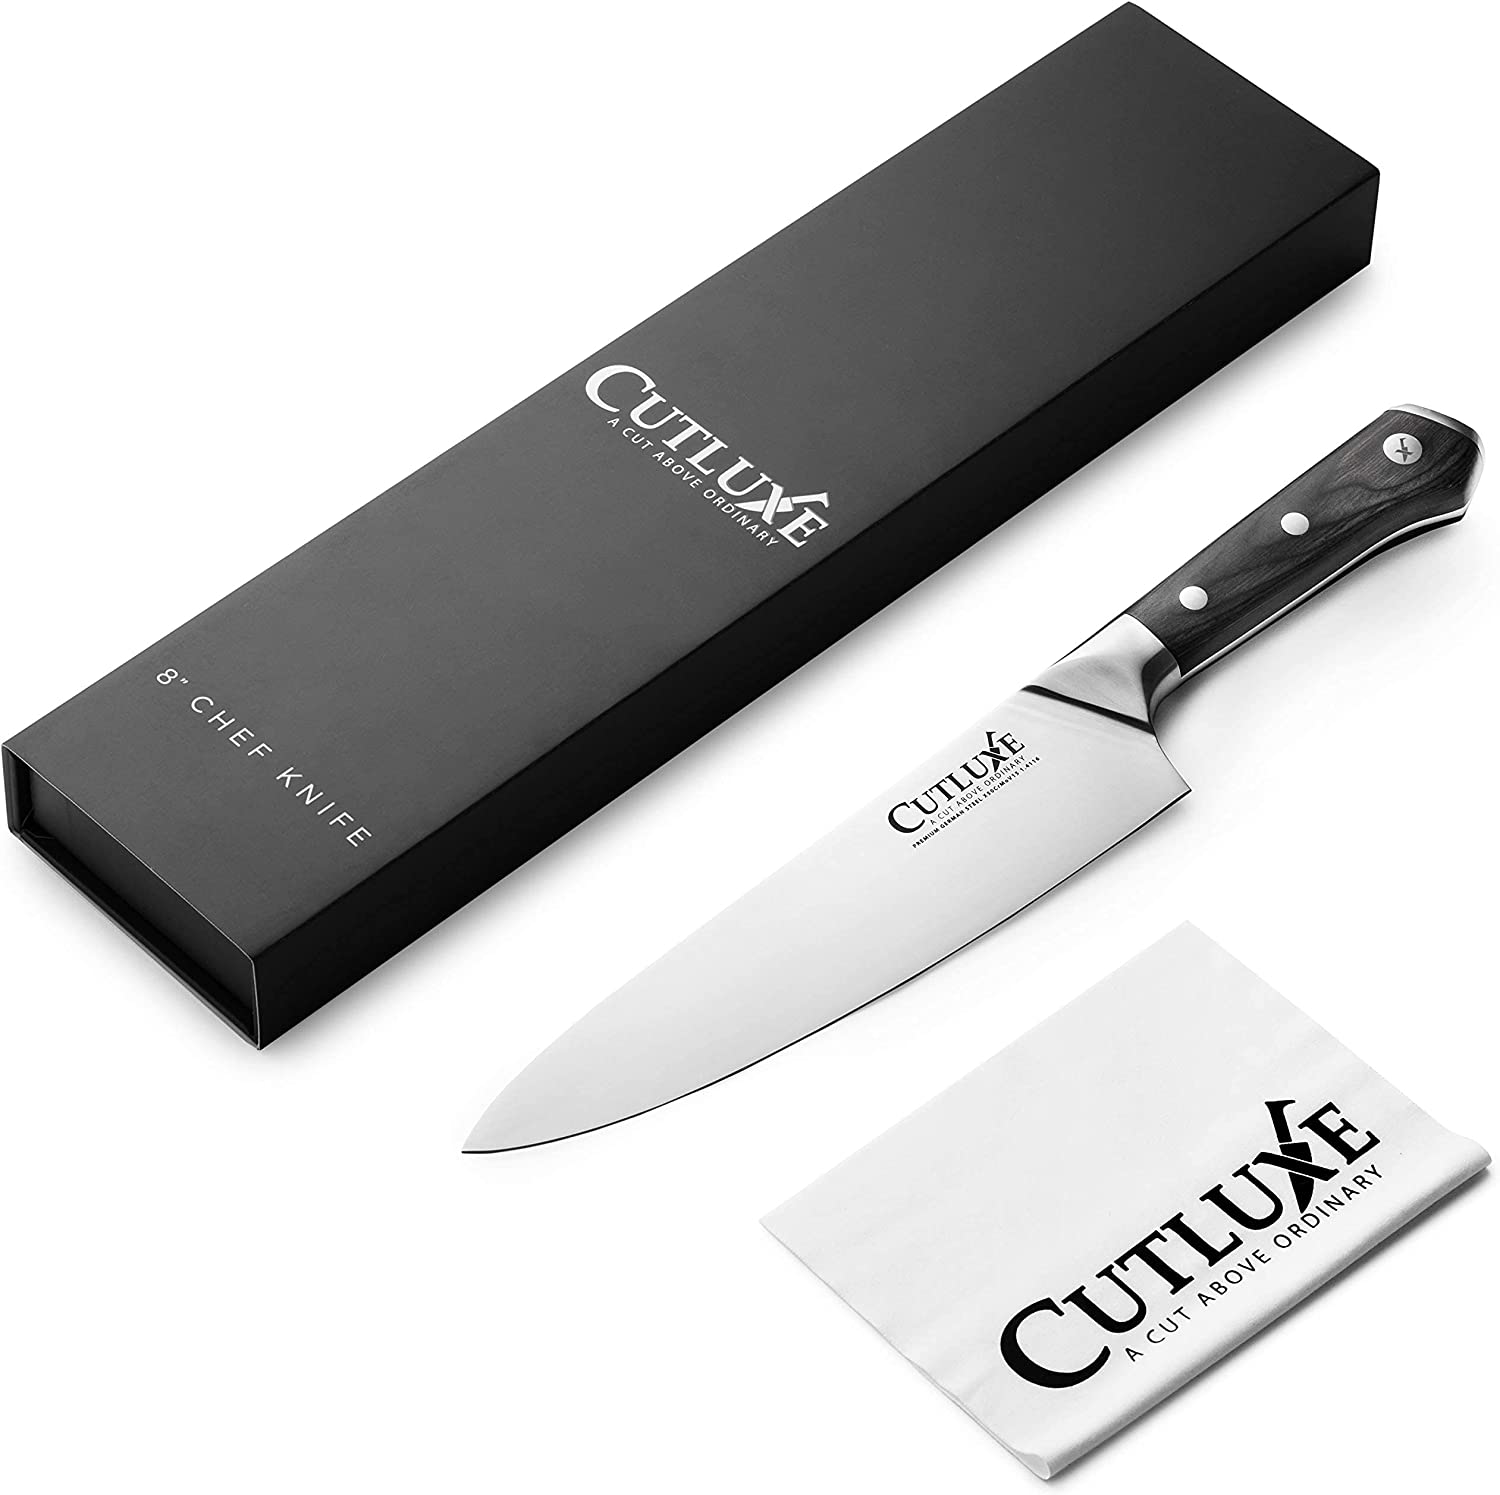 8 CHEF KNIFE